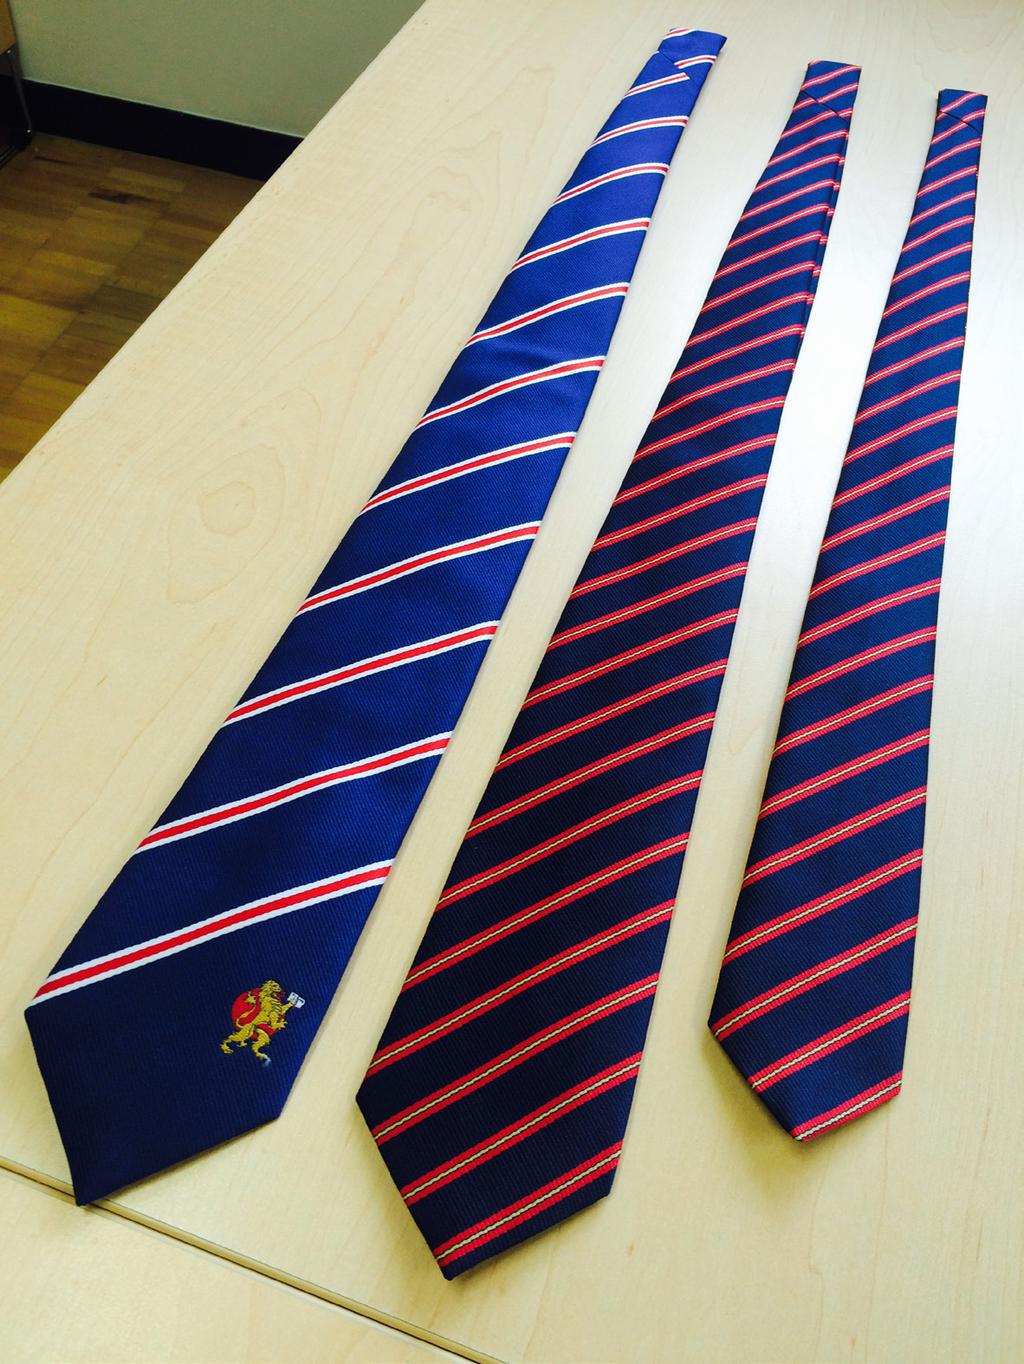 Secondary School Tie The Secondary School tie is available for purchase from the Secondary School reception desk. Jr. 1000 yen Reg.